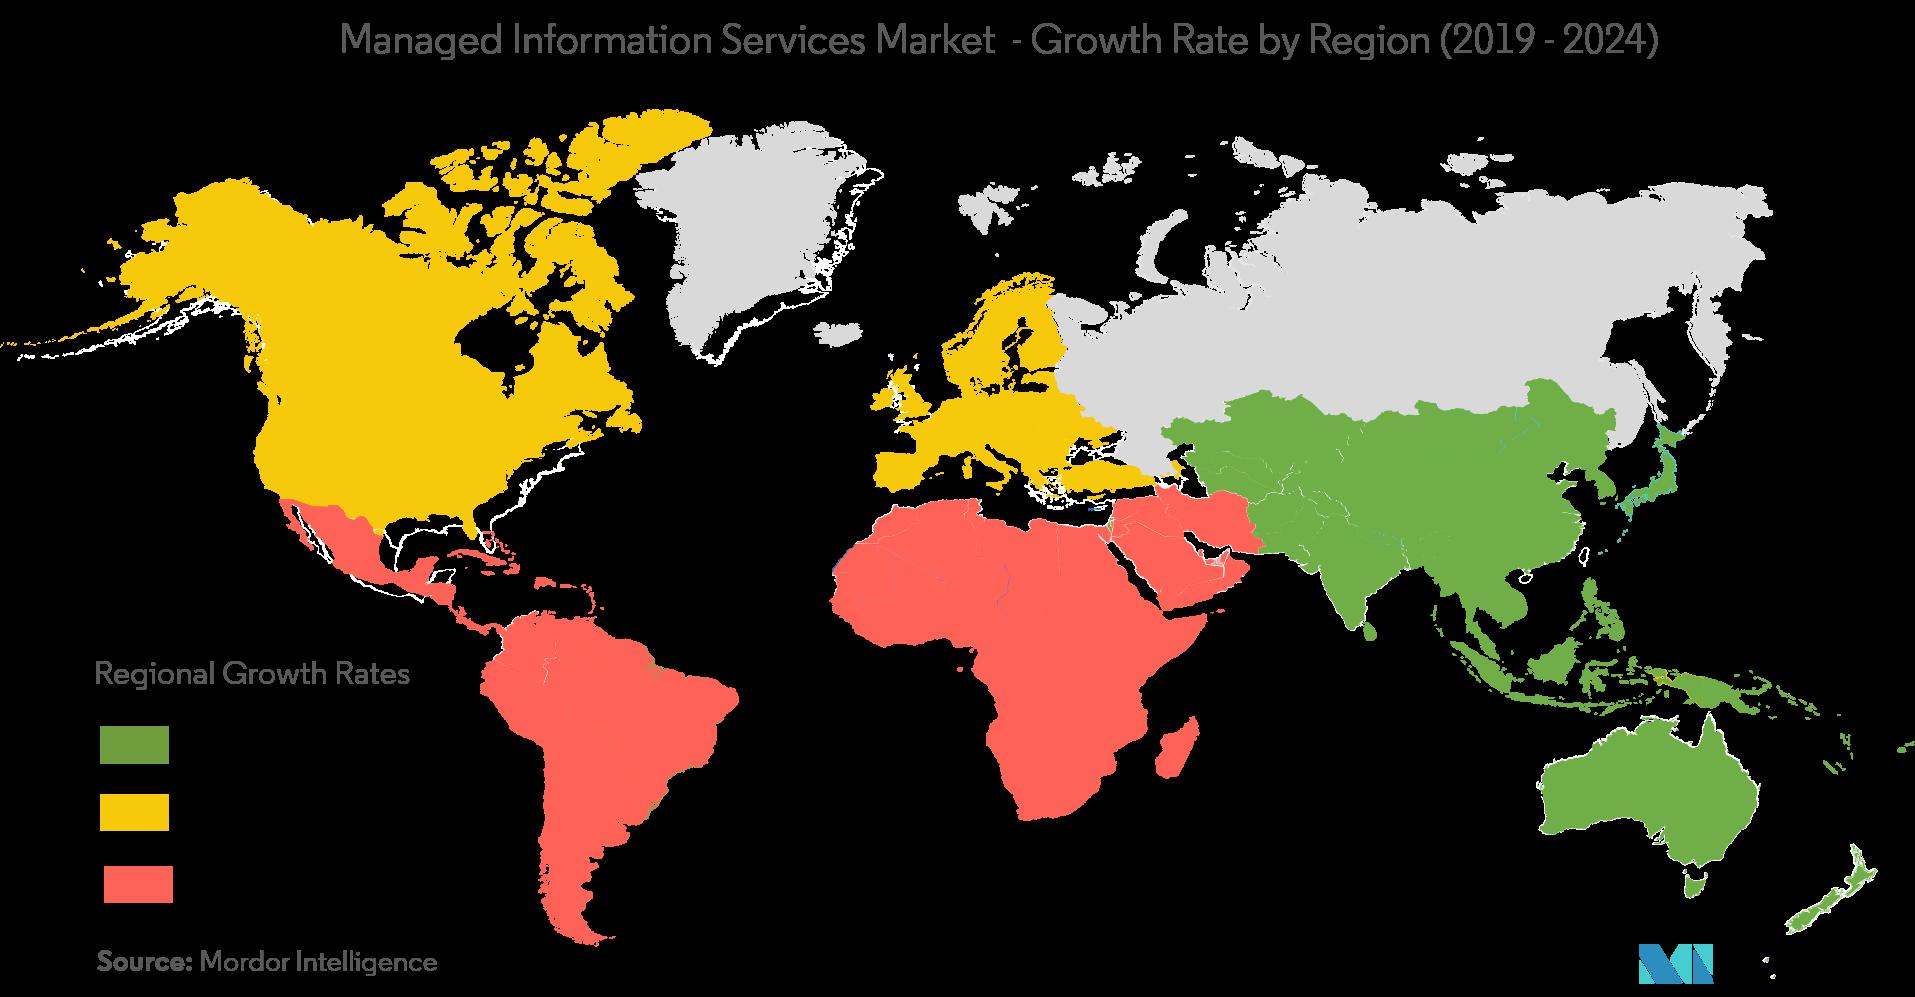 Managed Information Services Market Growth